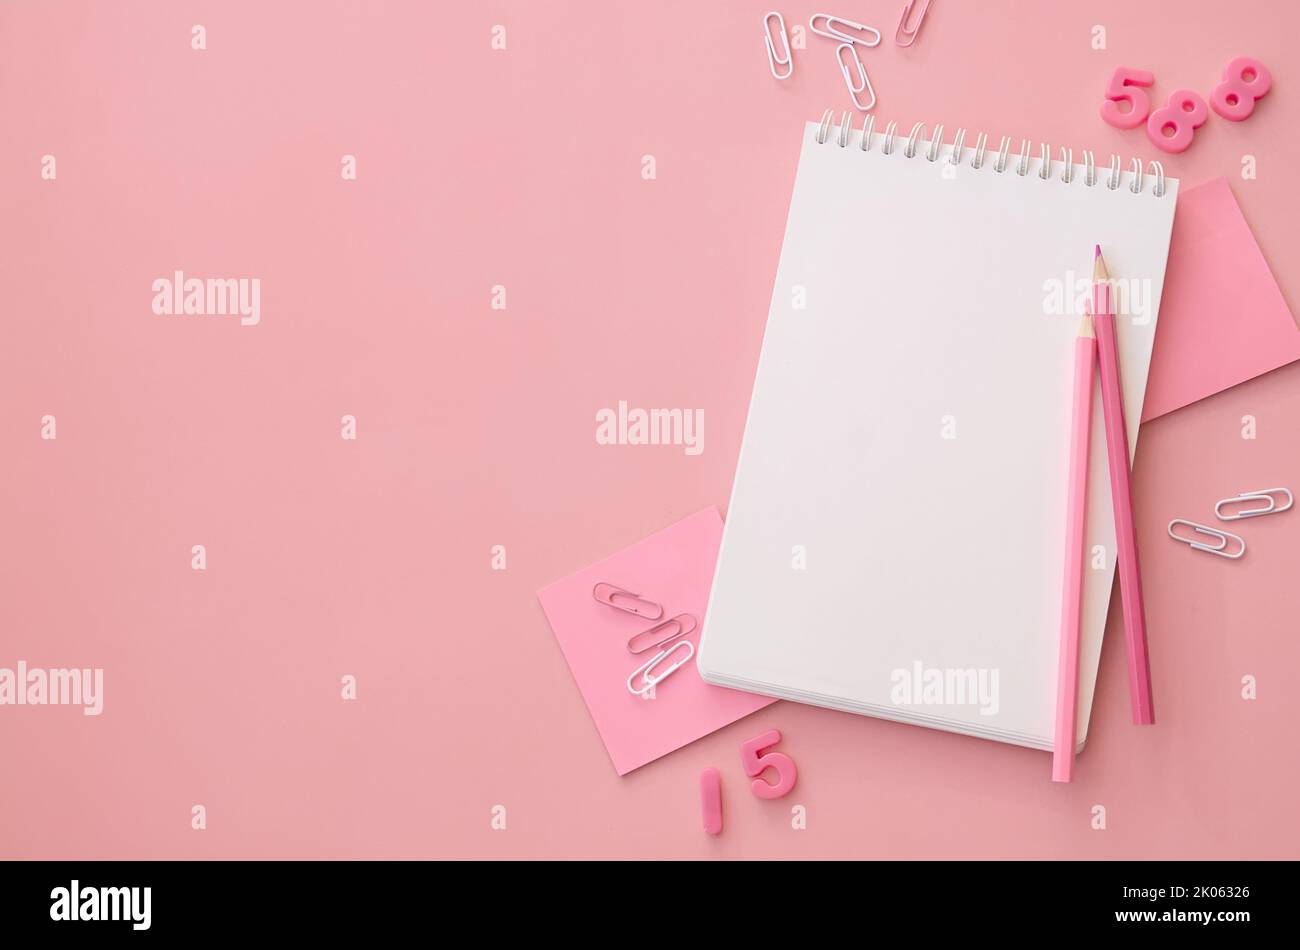 School stationery supply accessories on pink background, flat lay, copy space. Stock Photo